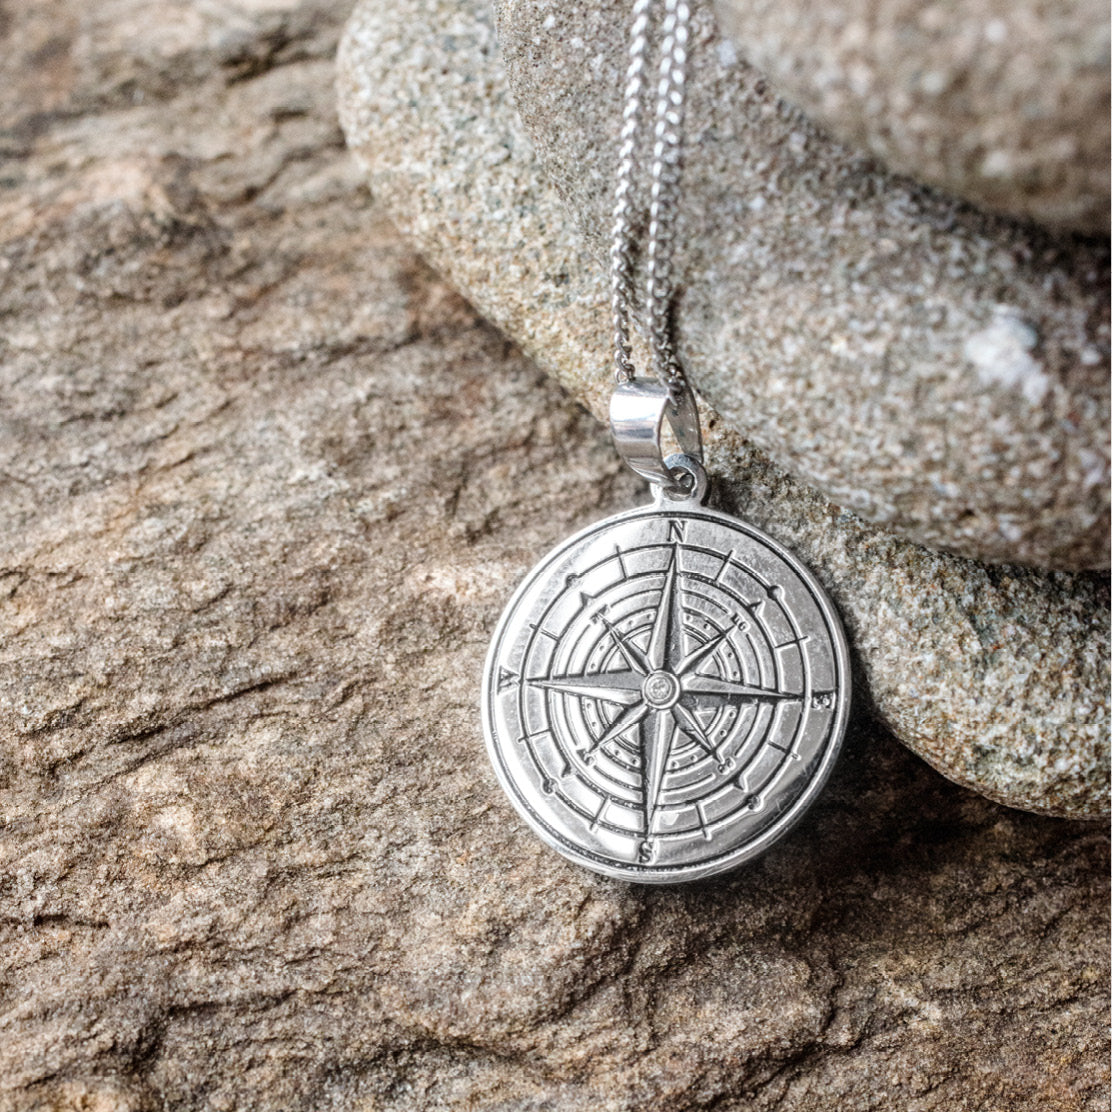 Right Direction Stainless Steel Compass Pendant Necklace with Inspirational Engraved Message